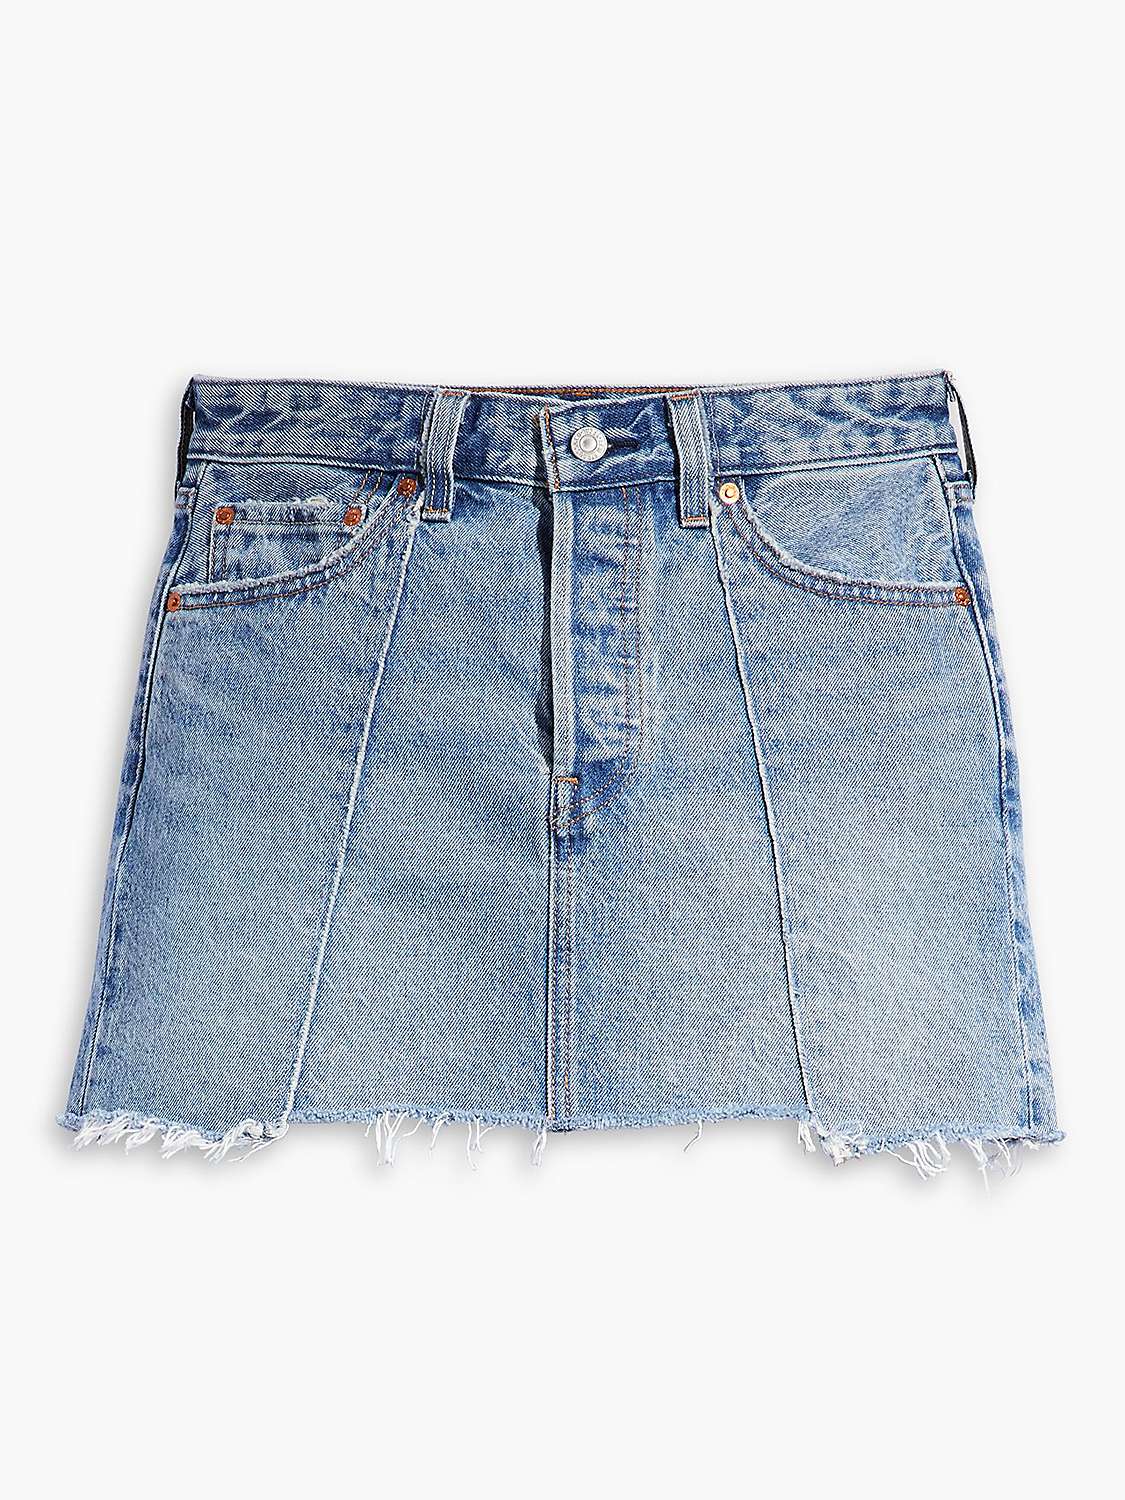 Buy Levi's Recrafted Icon Denim Mini Skirt Online at johnlewis.com